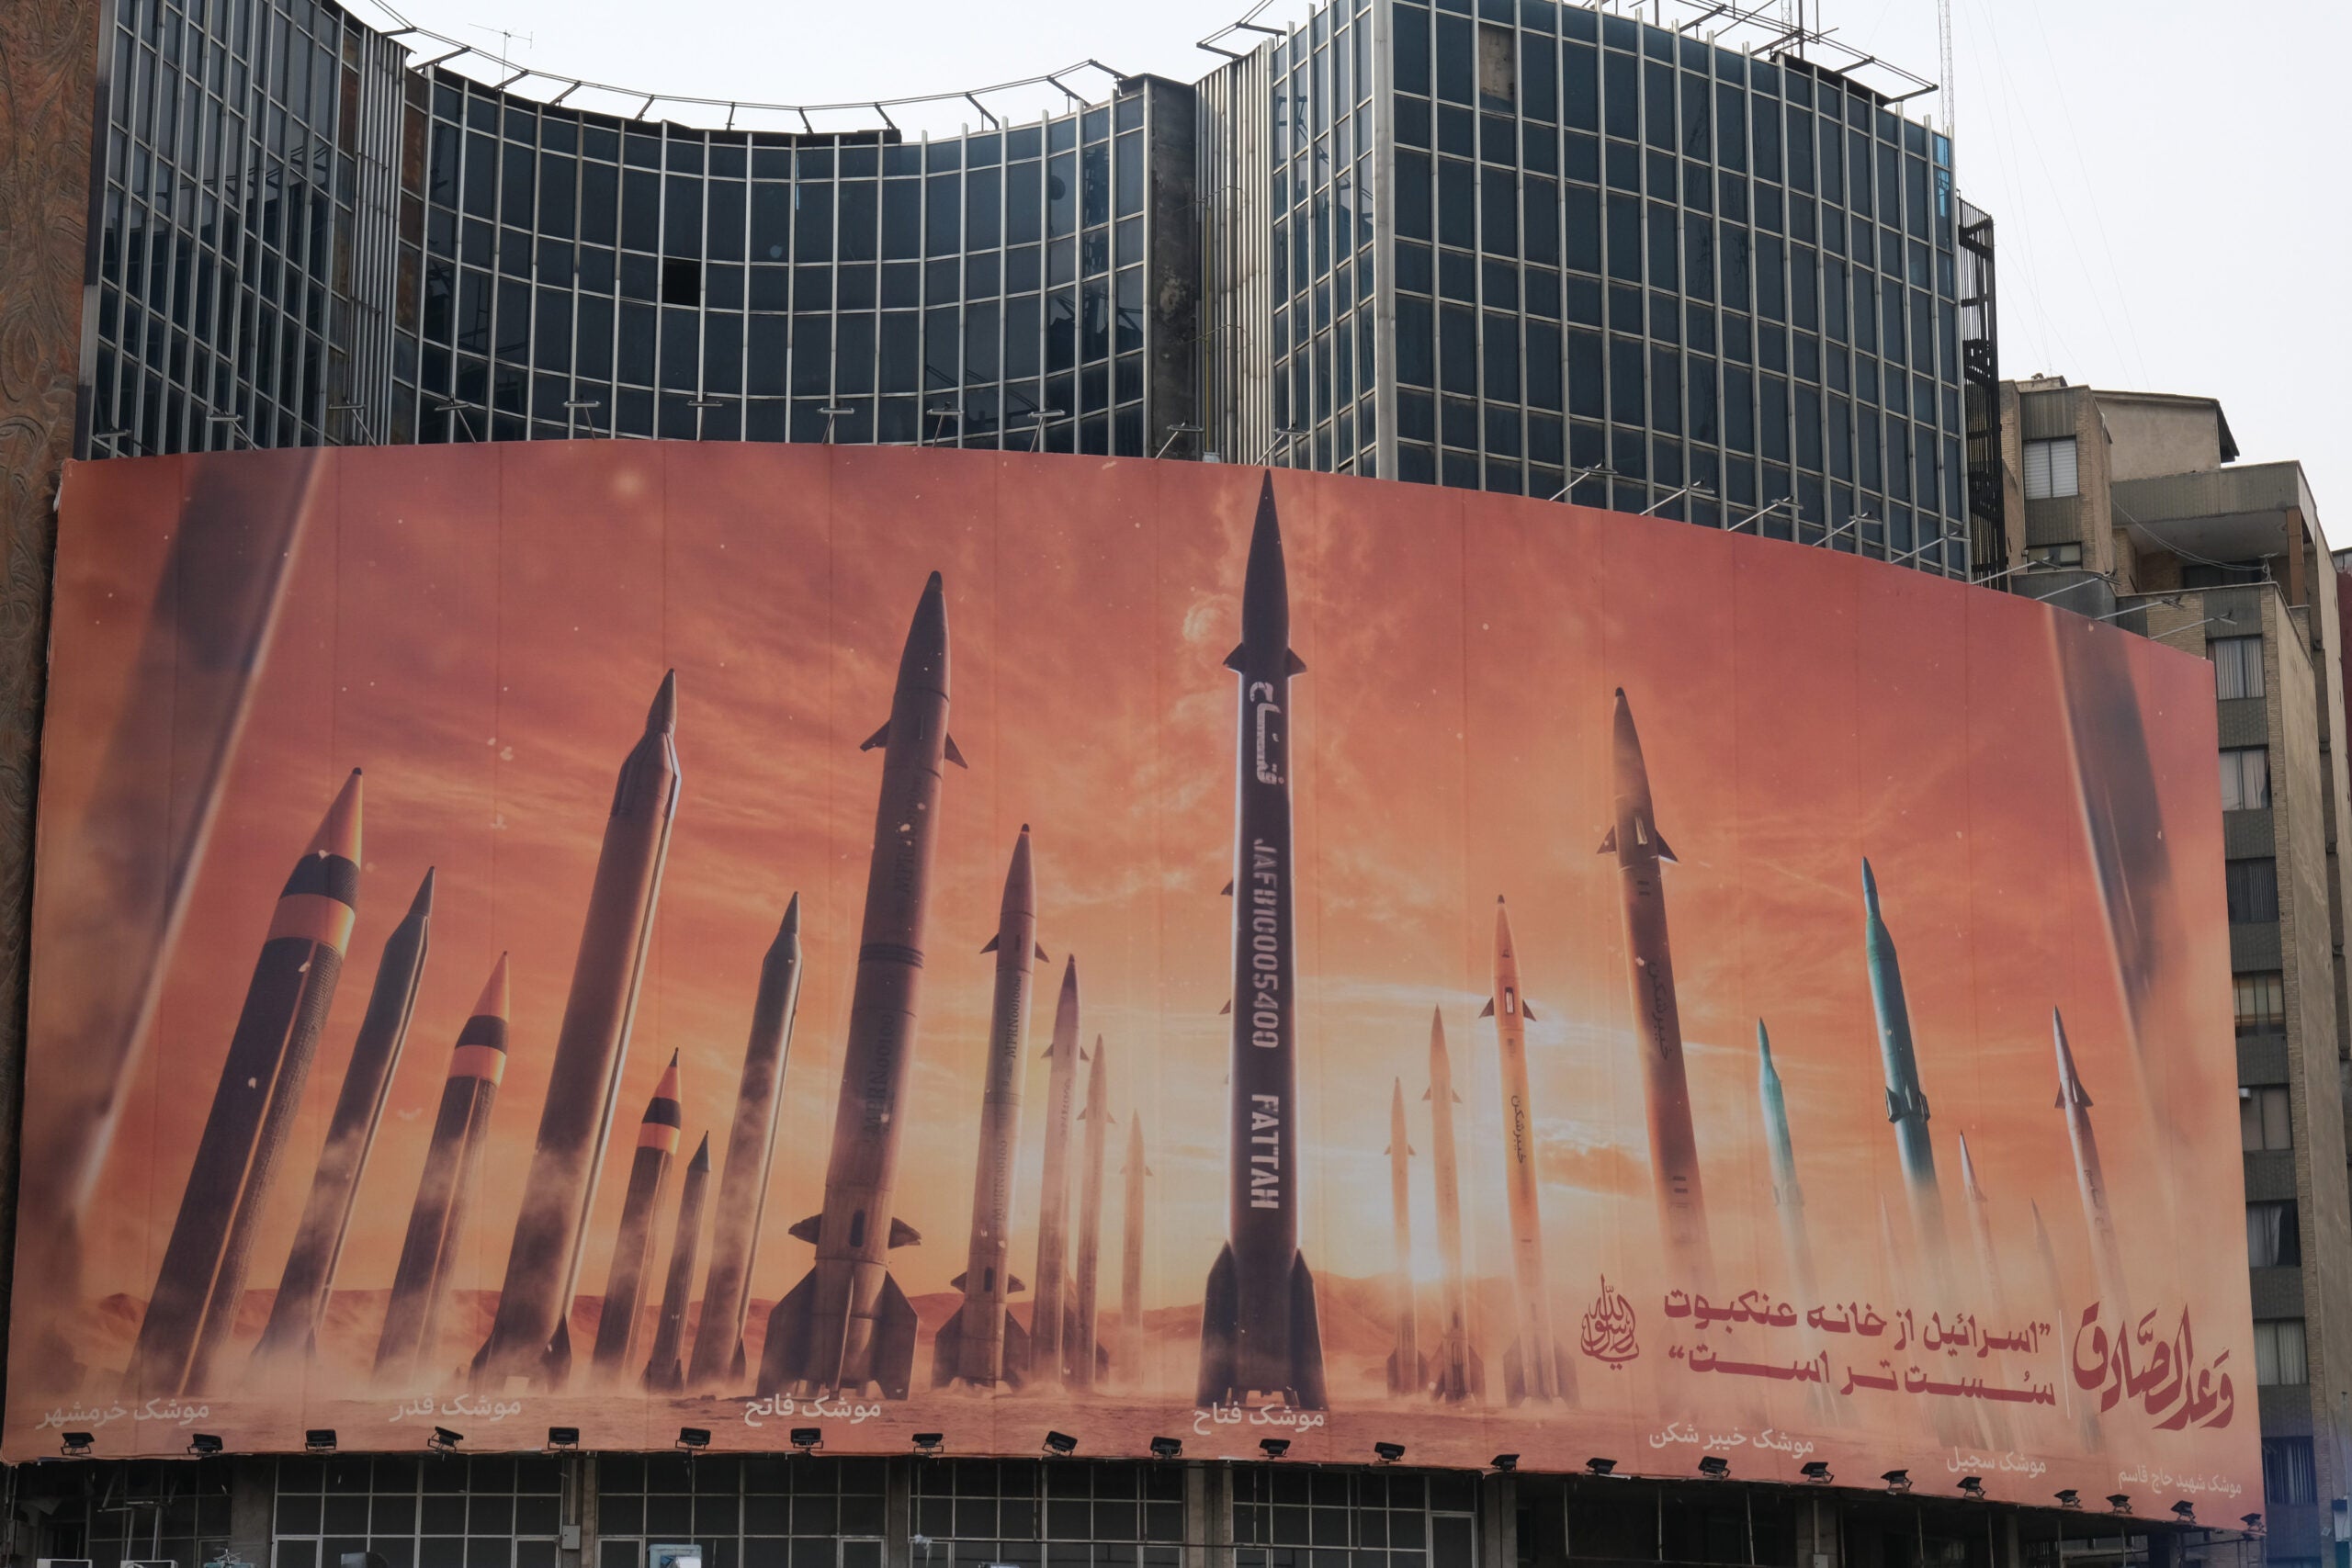 TEHRAN, IRAN - APRIL 16, 2024: A huge banner posted on a building facade in Vali Asr square depicts IRGC (Iranian Revolutionary Guard Corps) multiple missiles models aimed at Israel on April 16, 2024 in Tehran, Iran. Iran suspects Israel of the attack on the consular section of Iranian embassy in Damascus, Syria on April 1 which Israel have neither confirmed nor denied. Between April 13, 14,2024 overnight Iran sent missiles and drones in retaliation of the consular attack, targeting Israel which were mostly intercepted by Israeli forces and international partners. (Photo by Kaveh Kazemi/Getty Images)